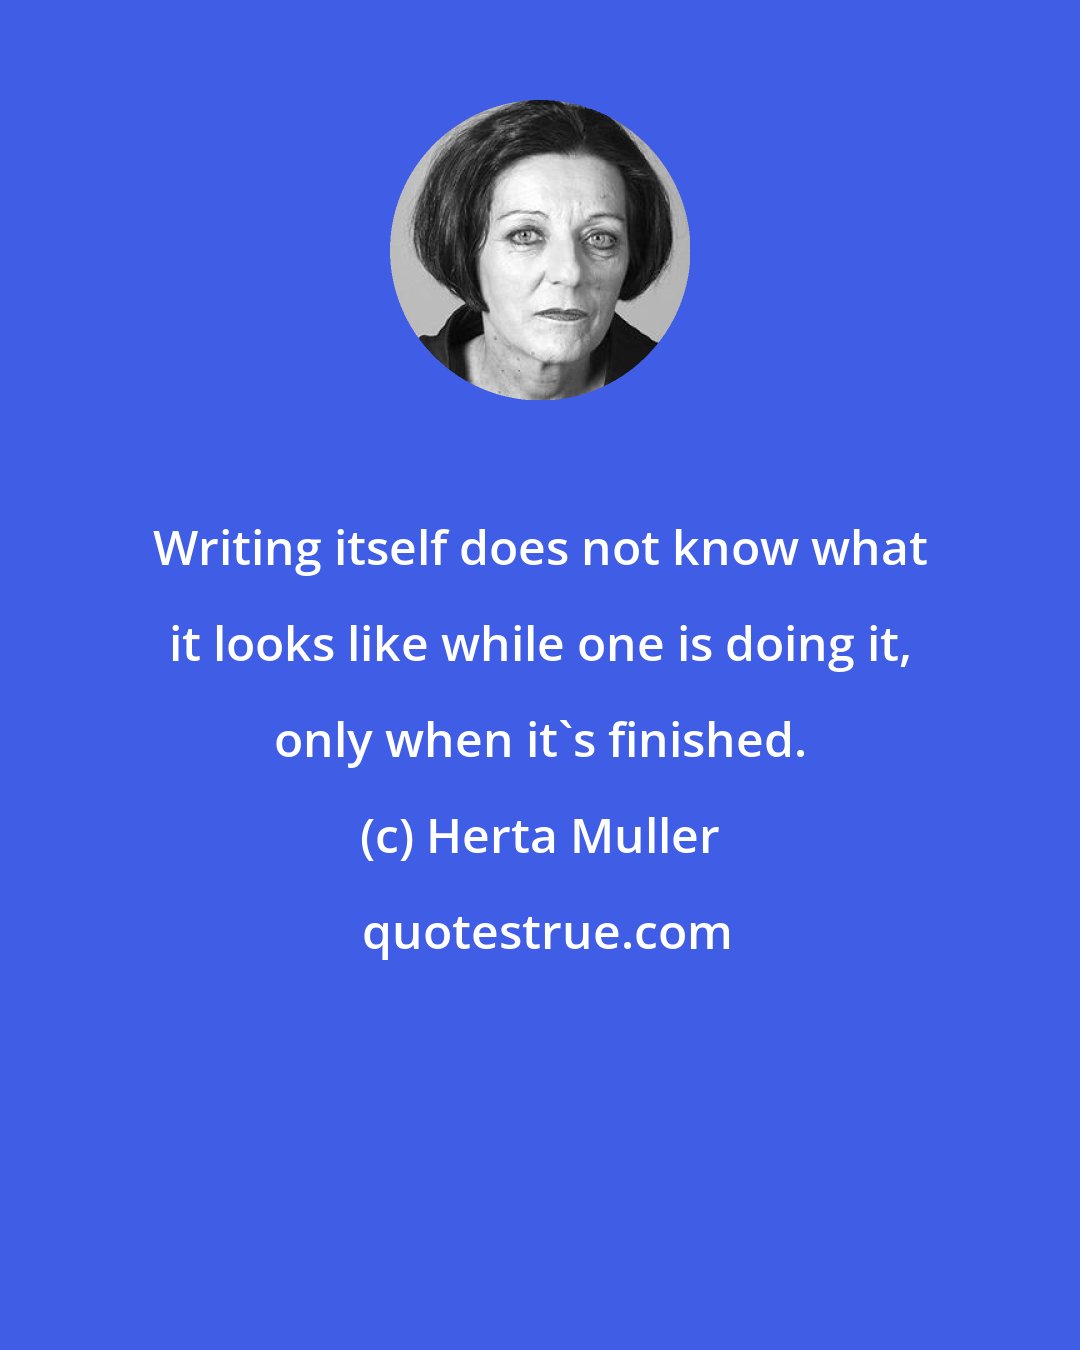 Herta Muller: Writing itself does not know what it looks like while one is doing it, only when it's finished.